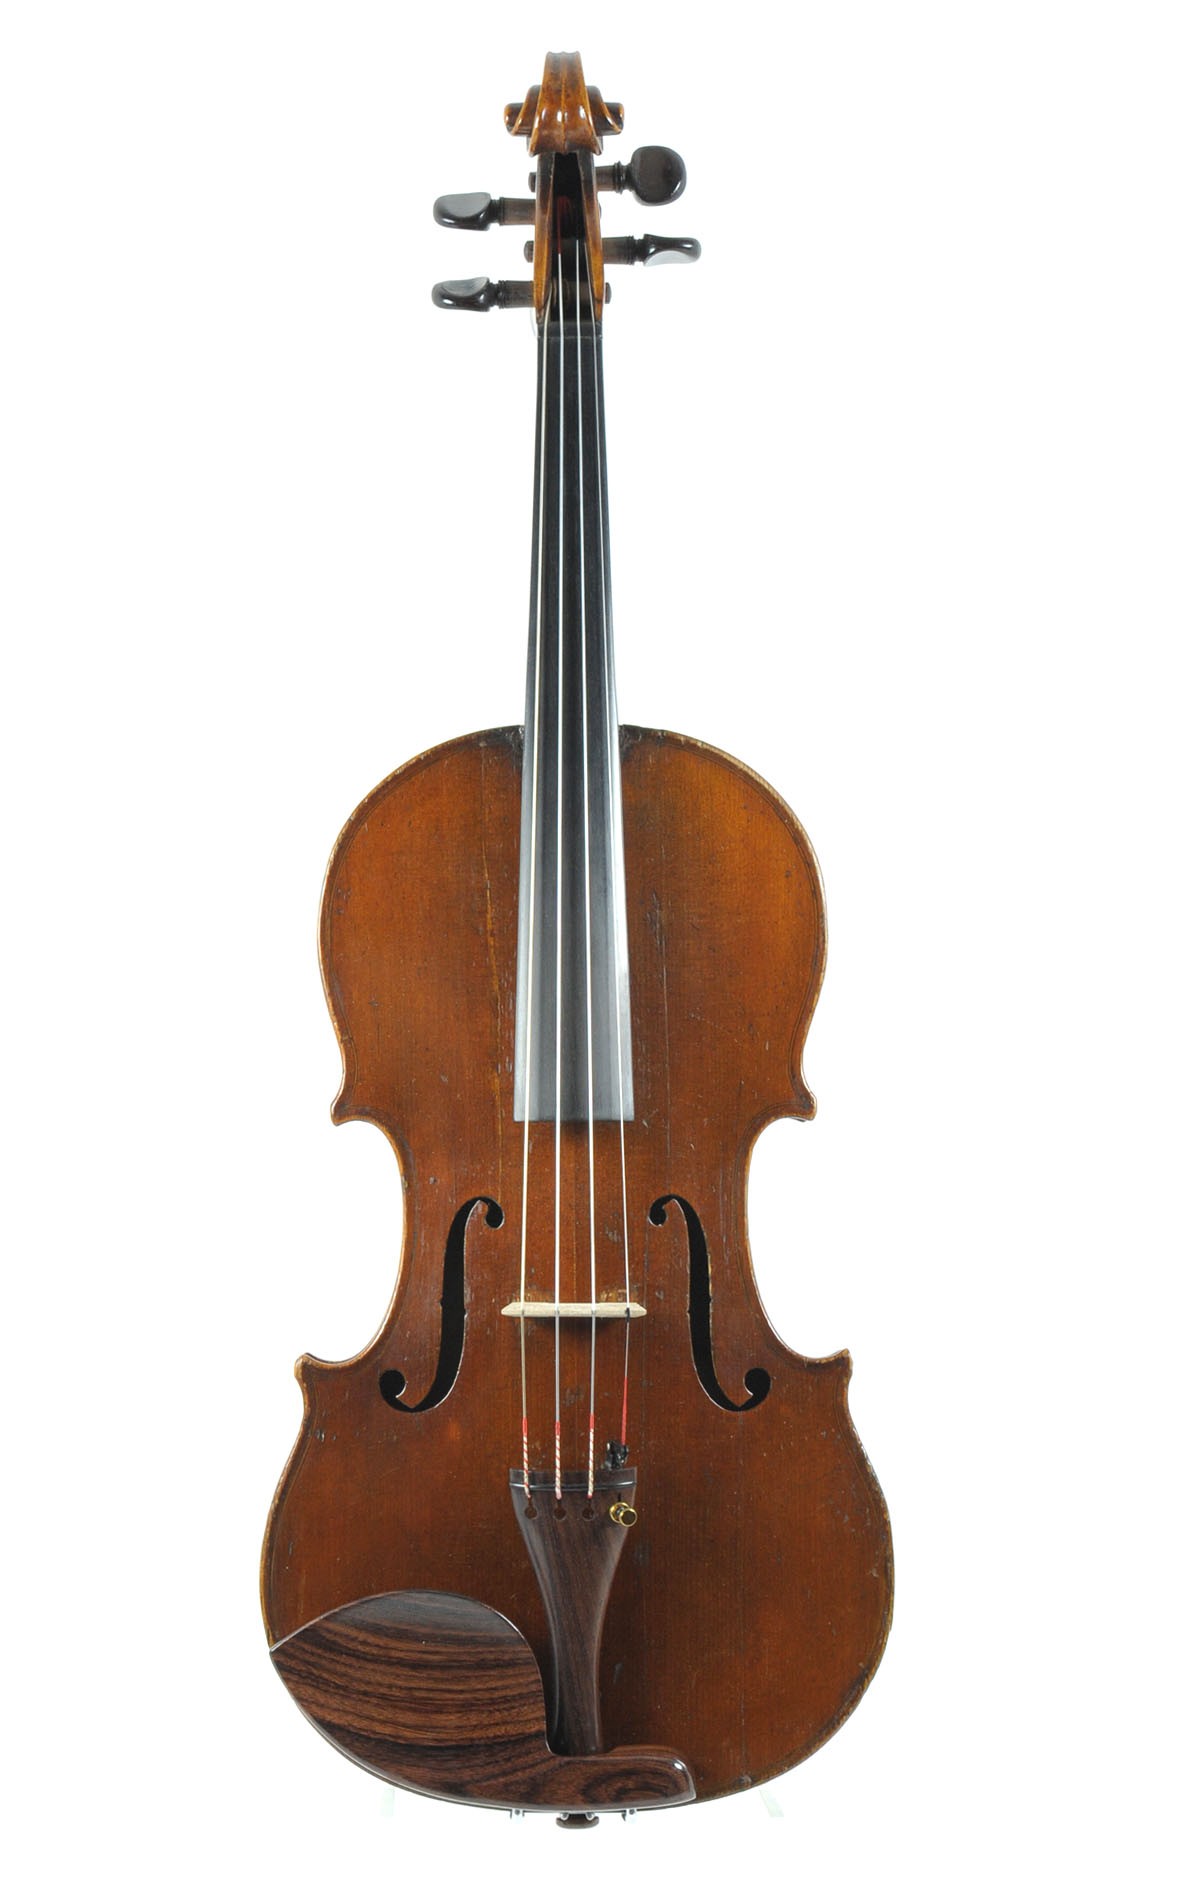 Jean Mathurin Remy, large violin, around 1820 - table